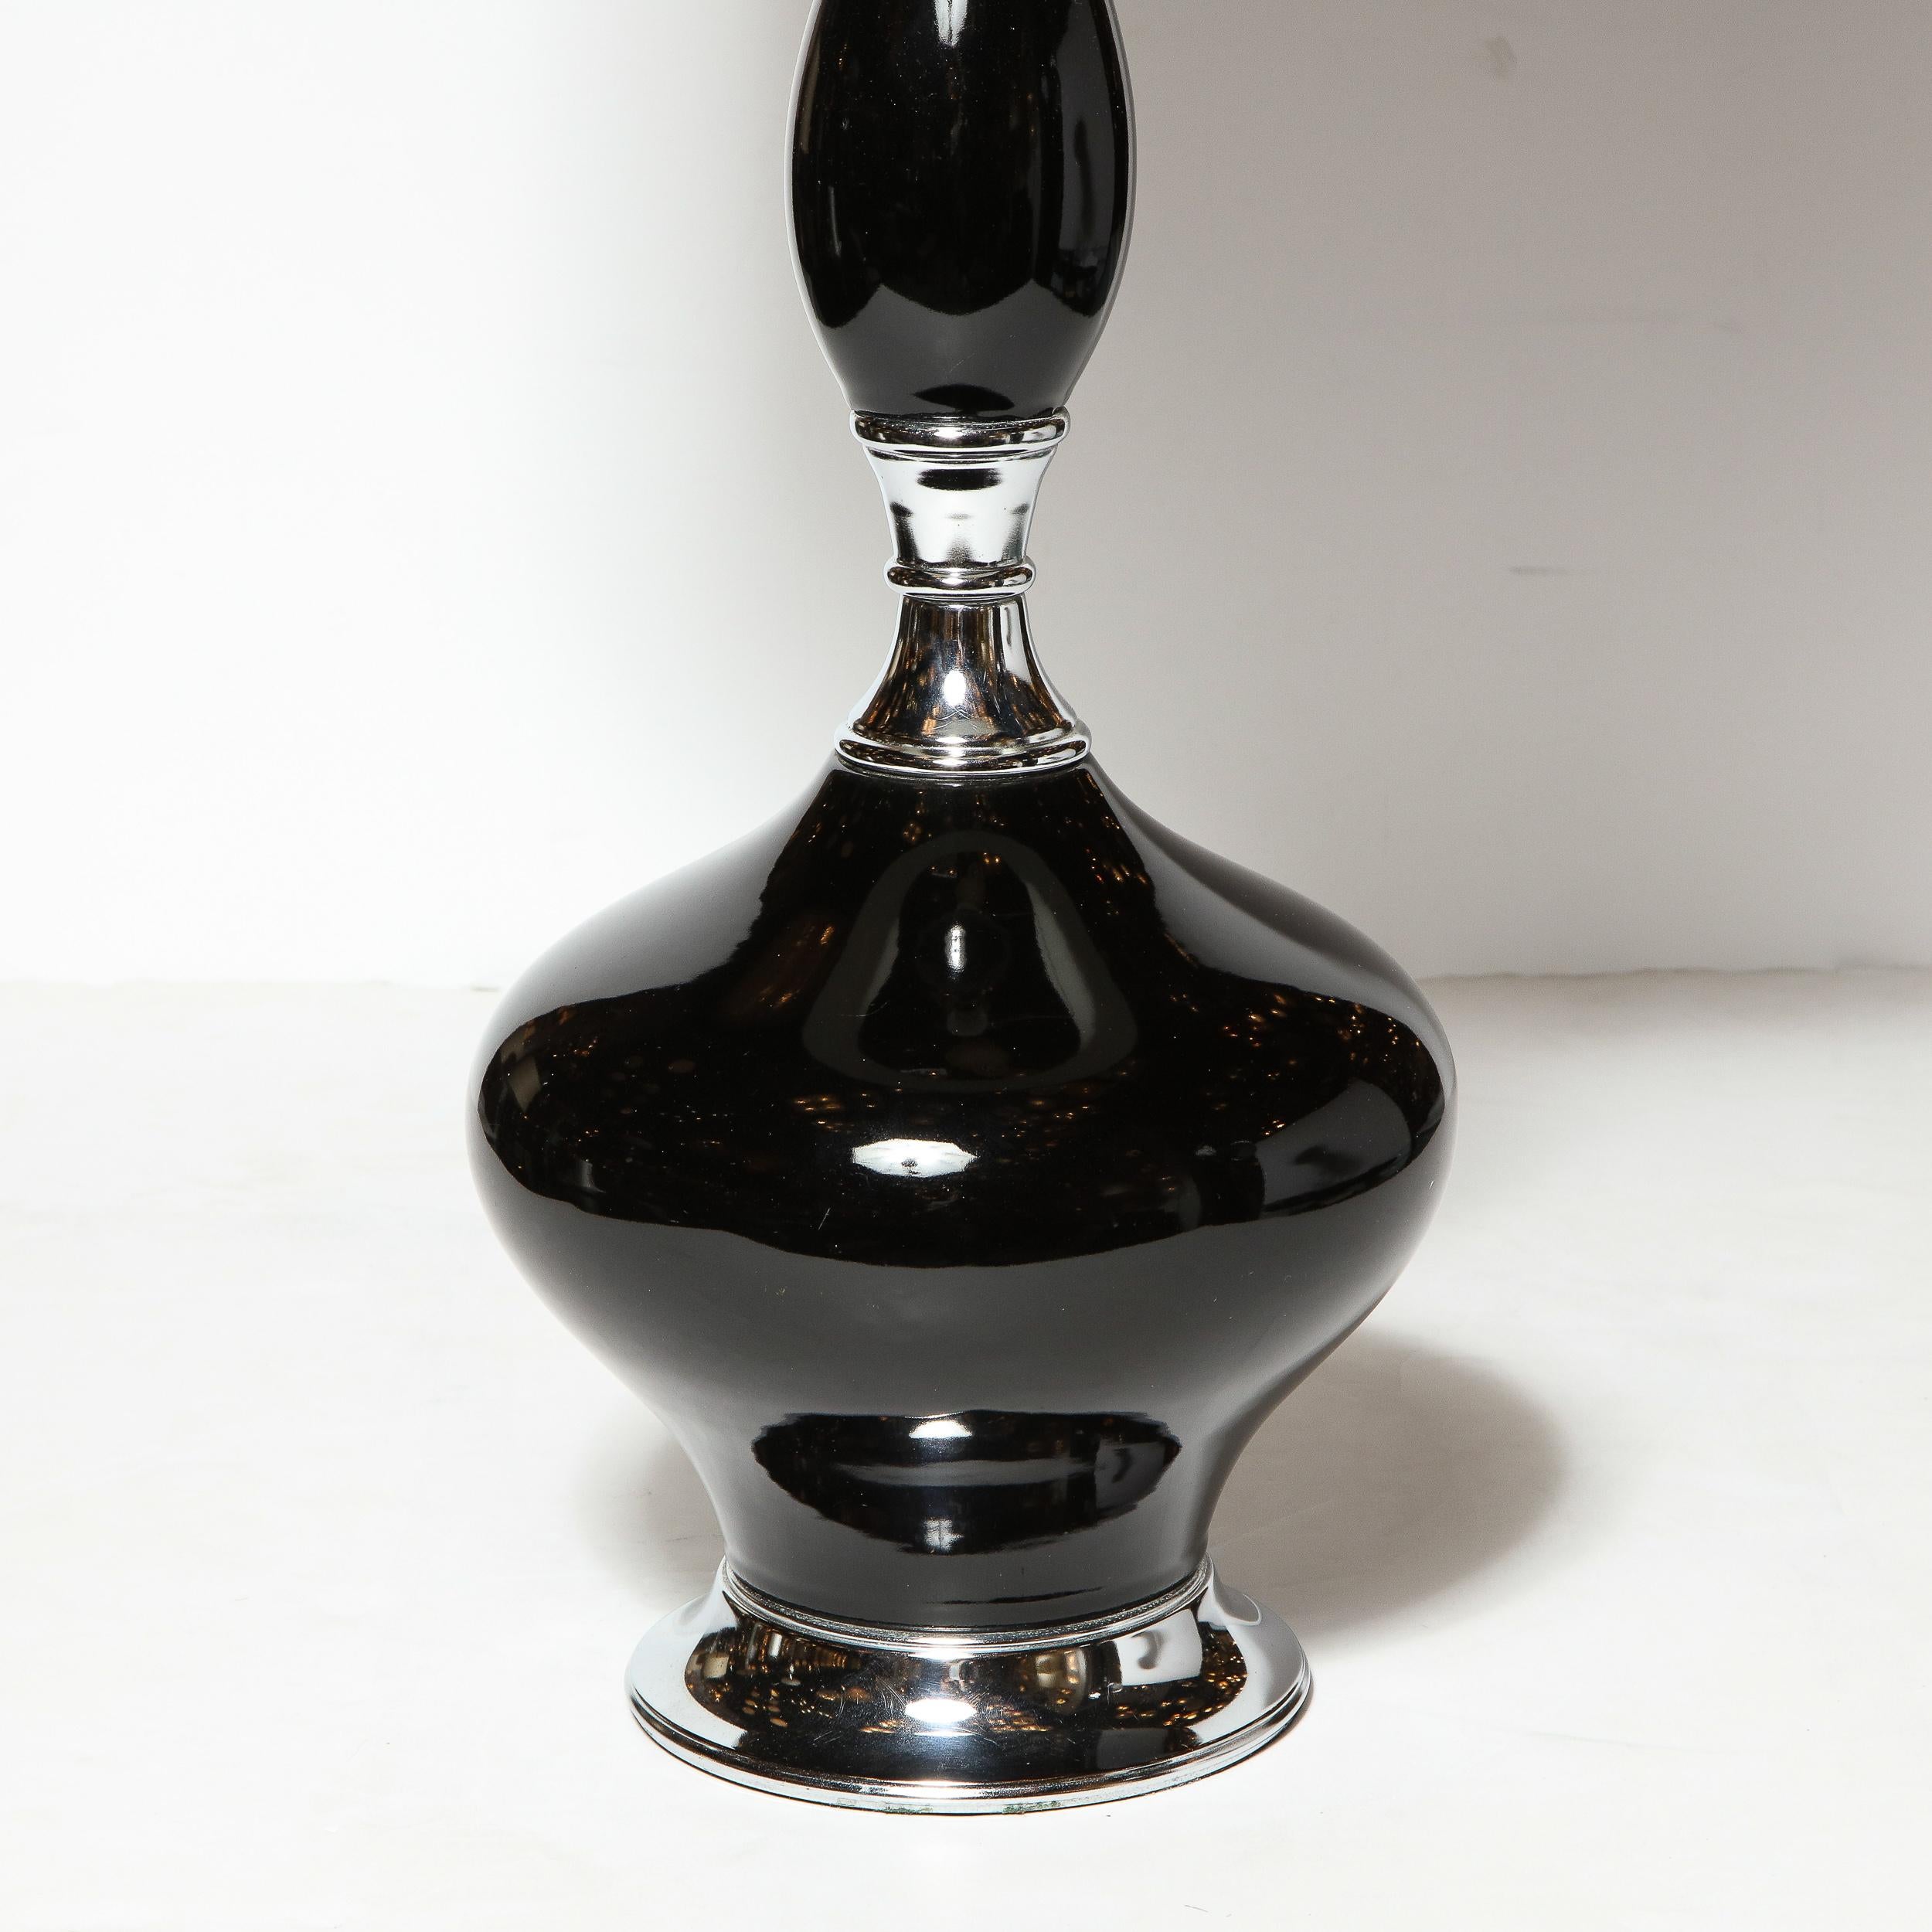 American Pair of Mid-Century Modern Sculptural Black Glazed Ceramic Lamps w/ Chrome Bases For Sale